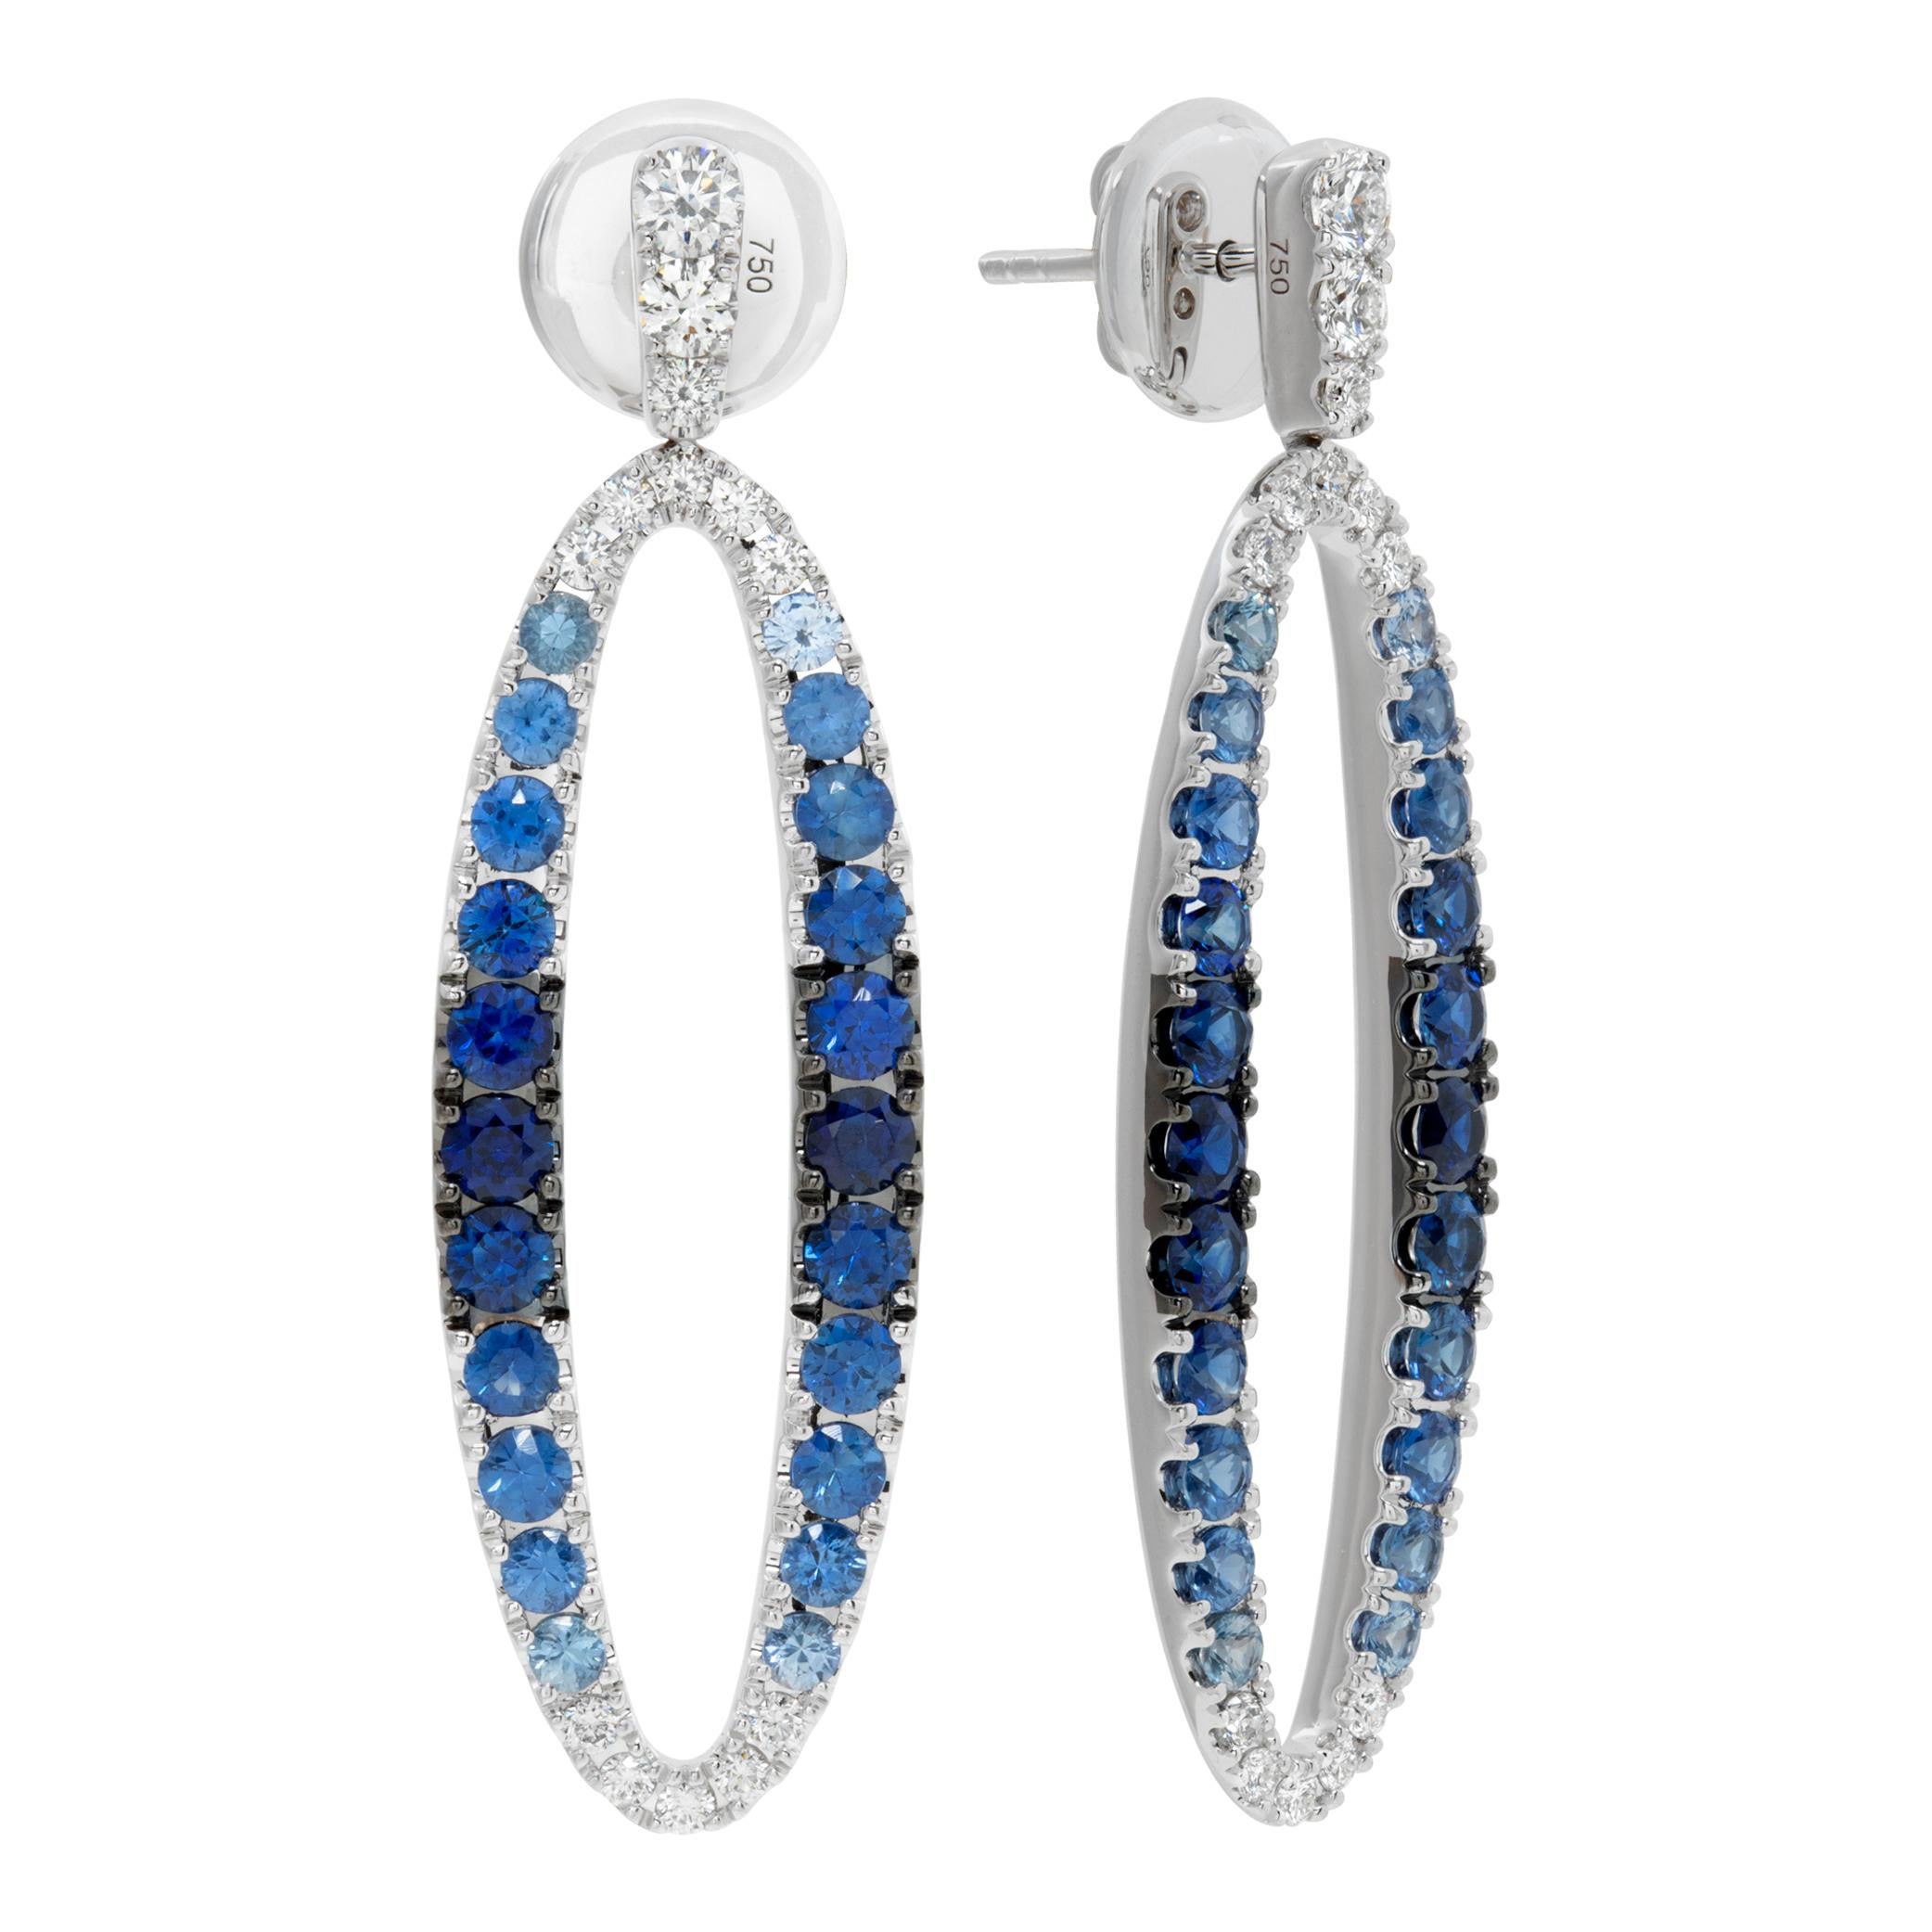 Diamond and sapphire 18k white gold drop earrings In Excellent Condition For Sale In Surfside, FL